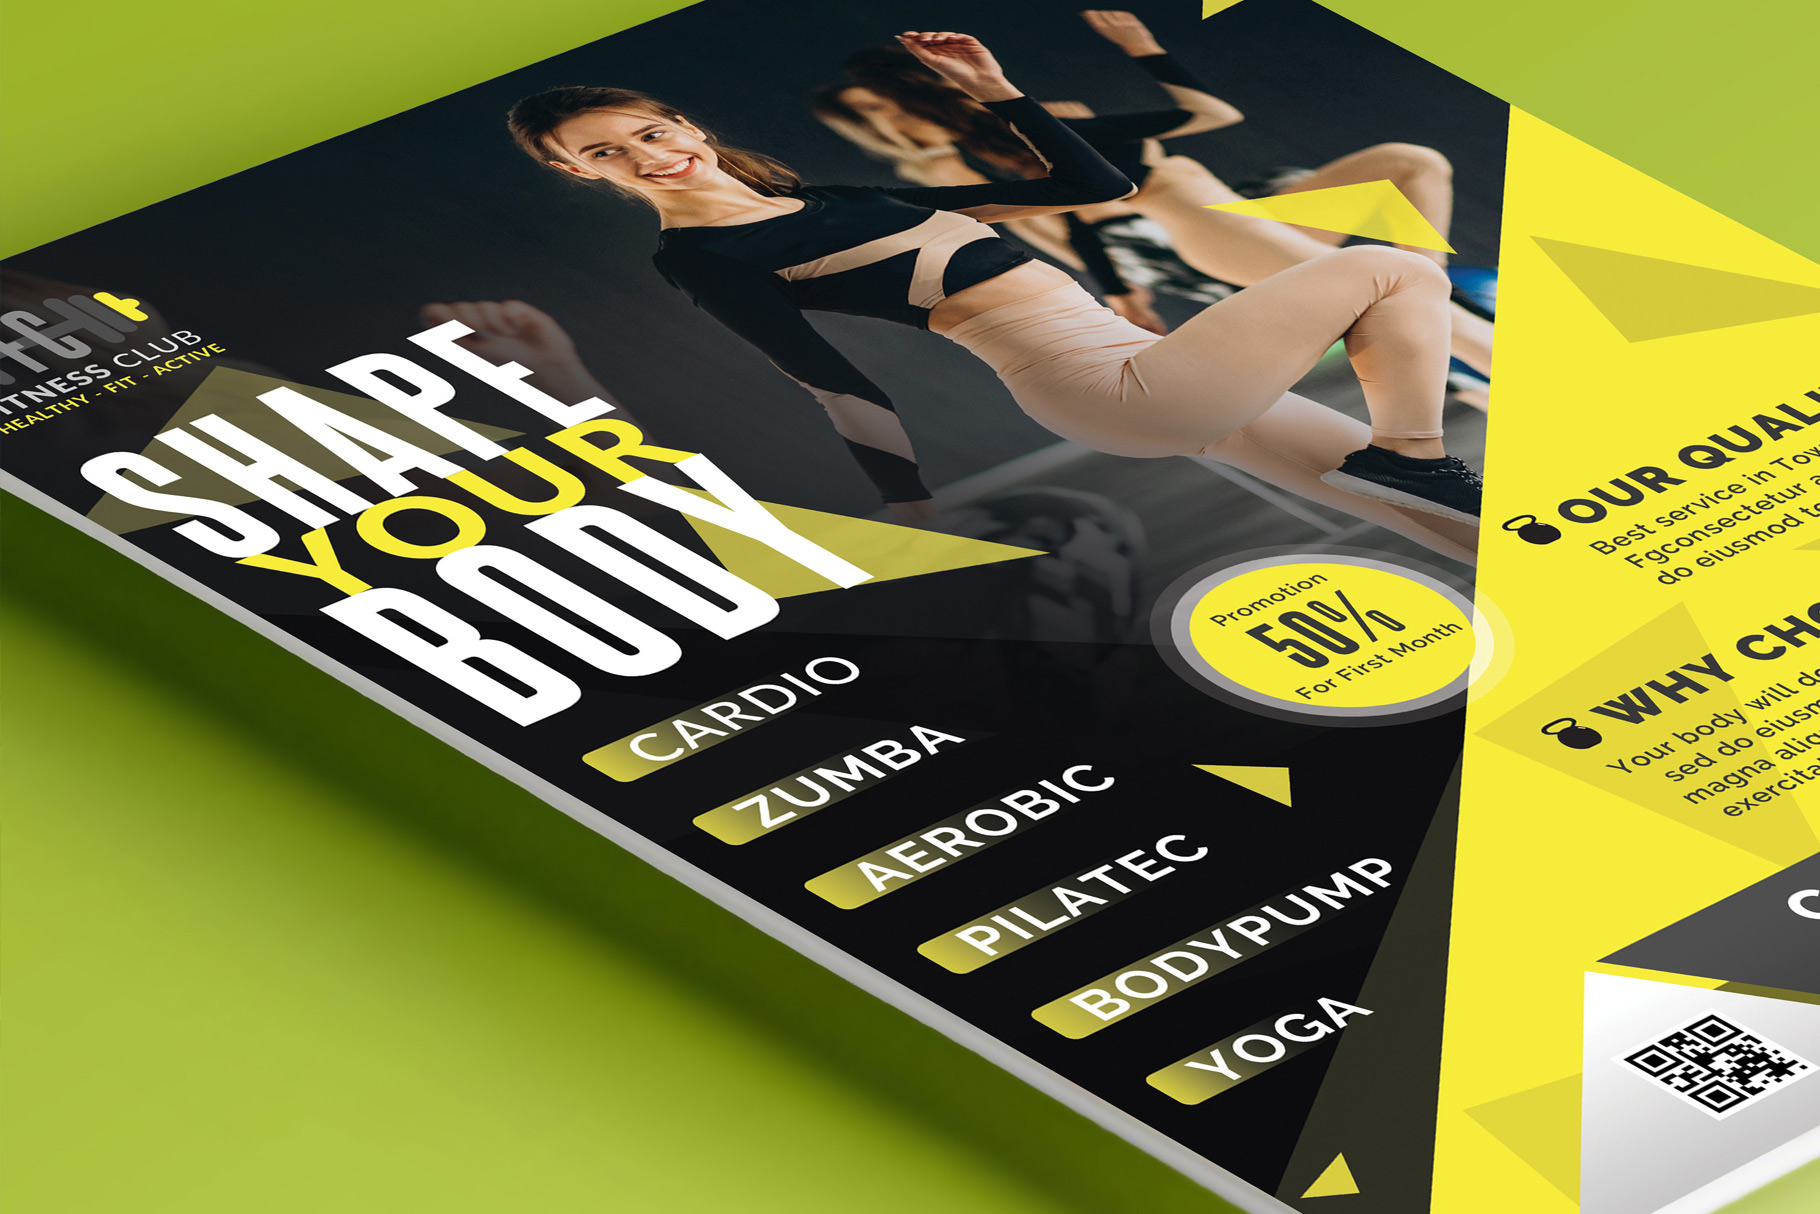 Fitness Center Flyer in yellow color.